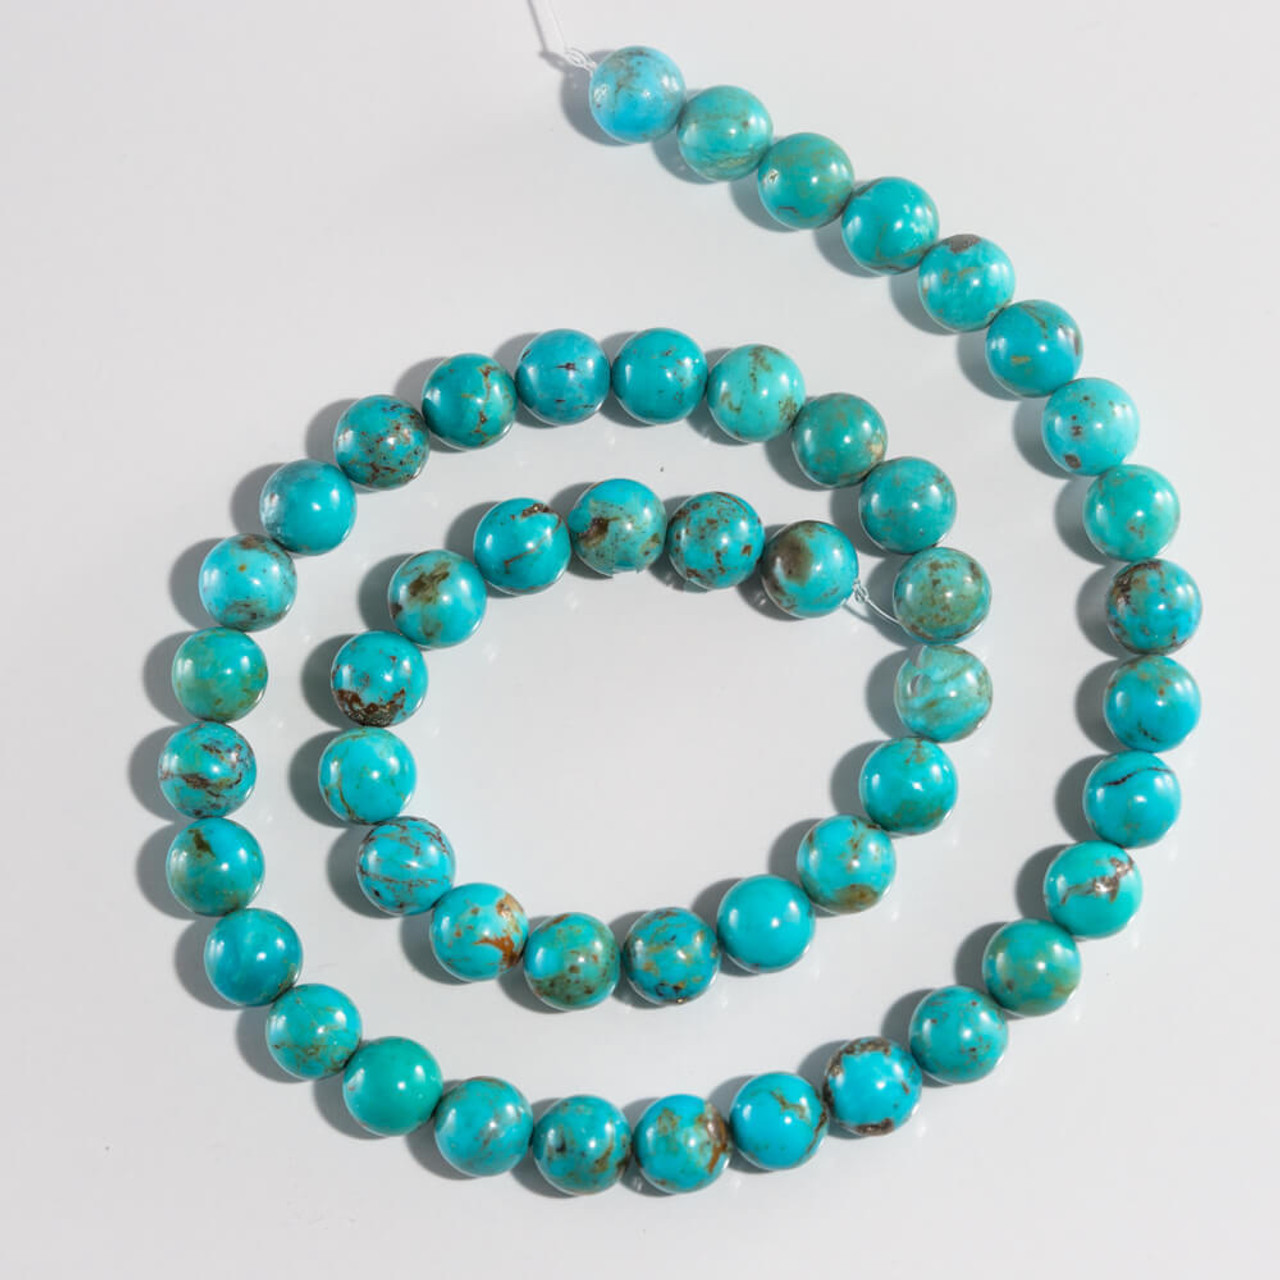 Turquoise Beads Campitos Turquoise(Mexico) 8mm Round TM8a 